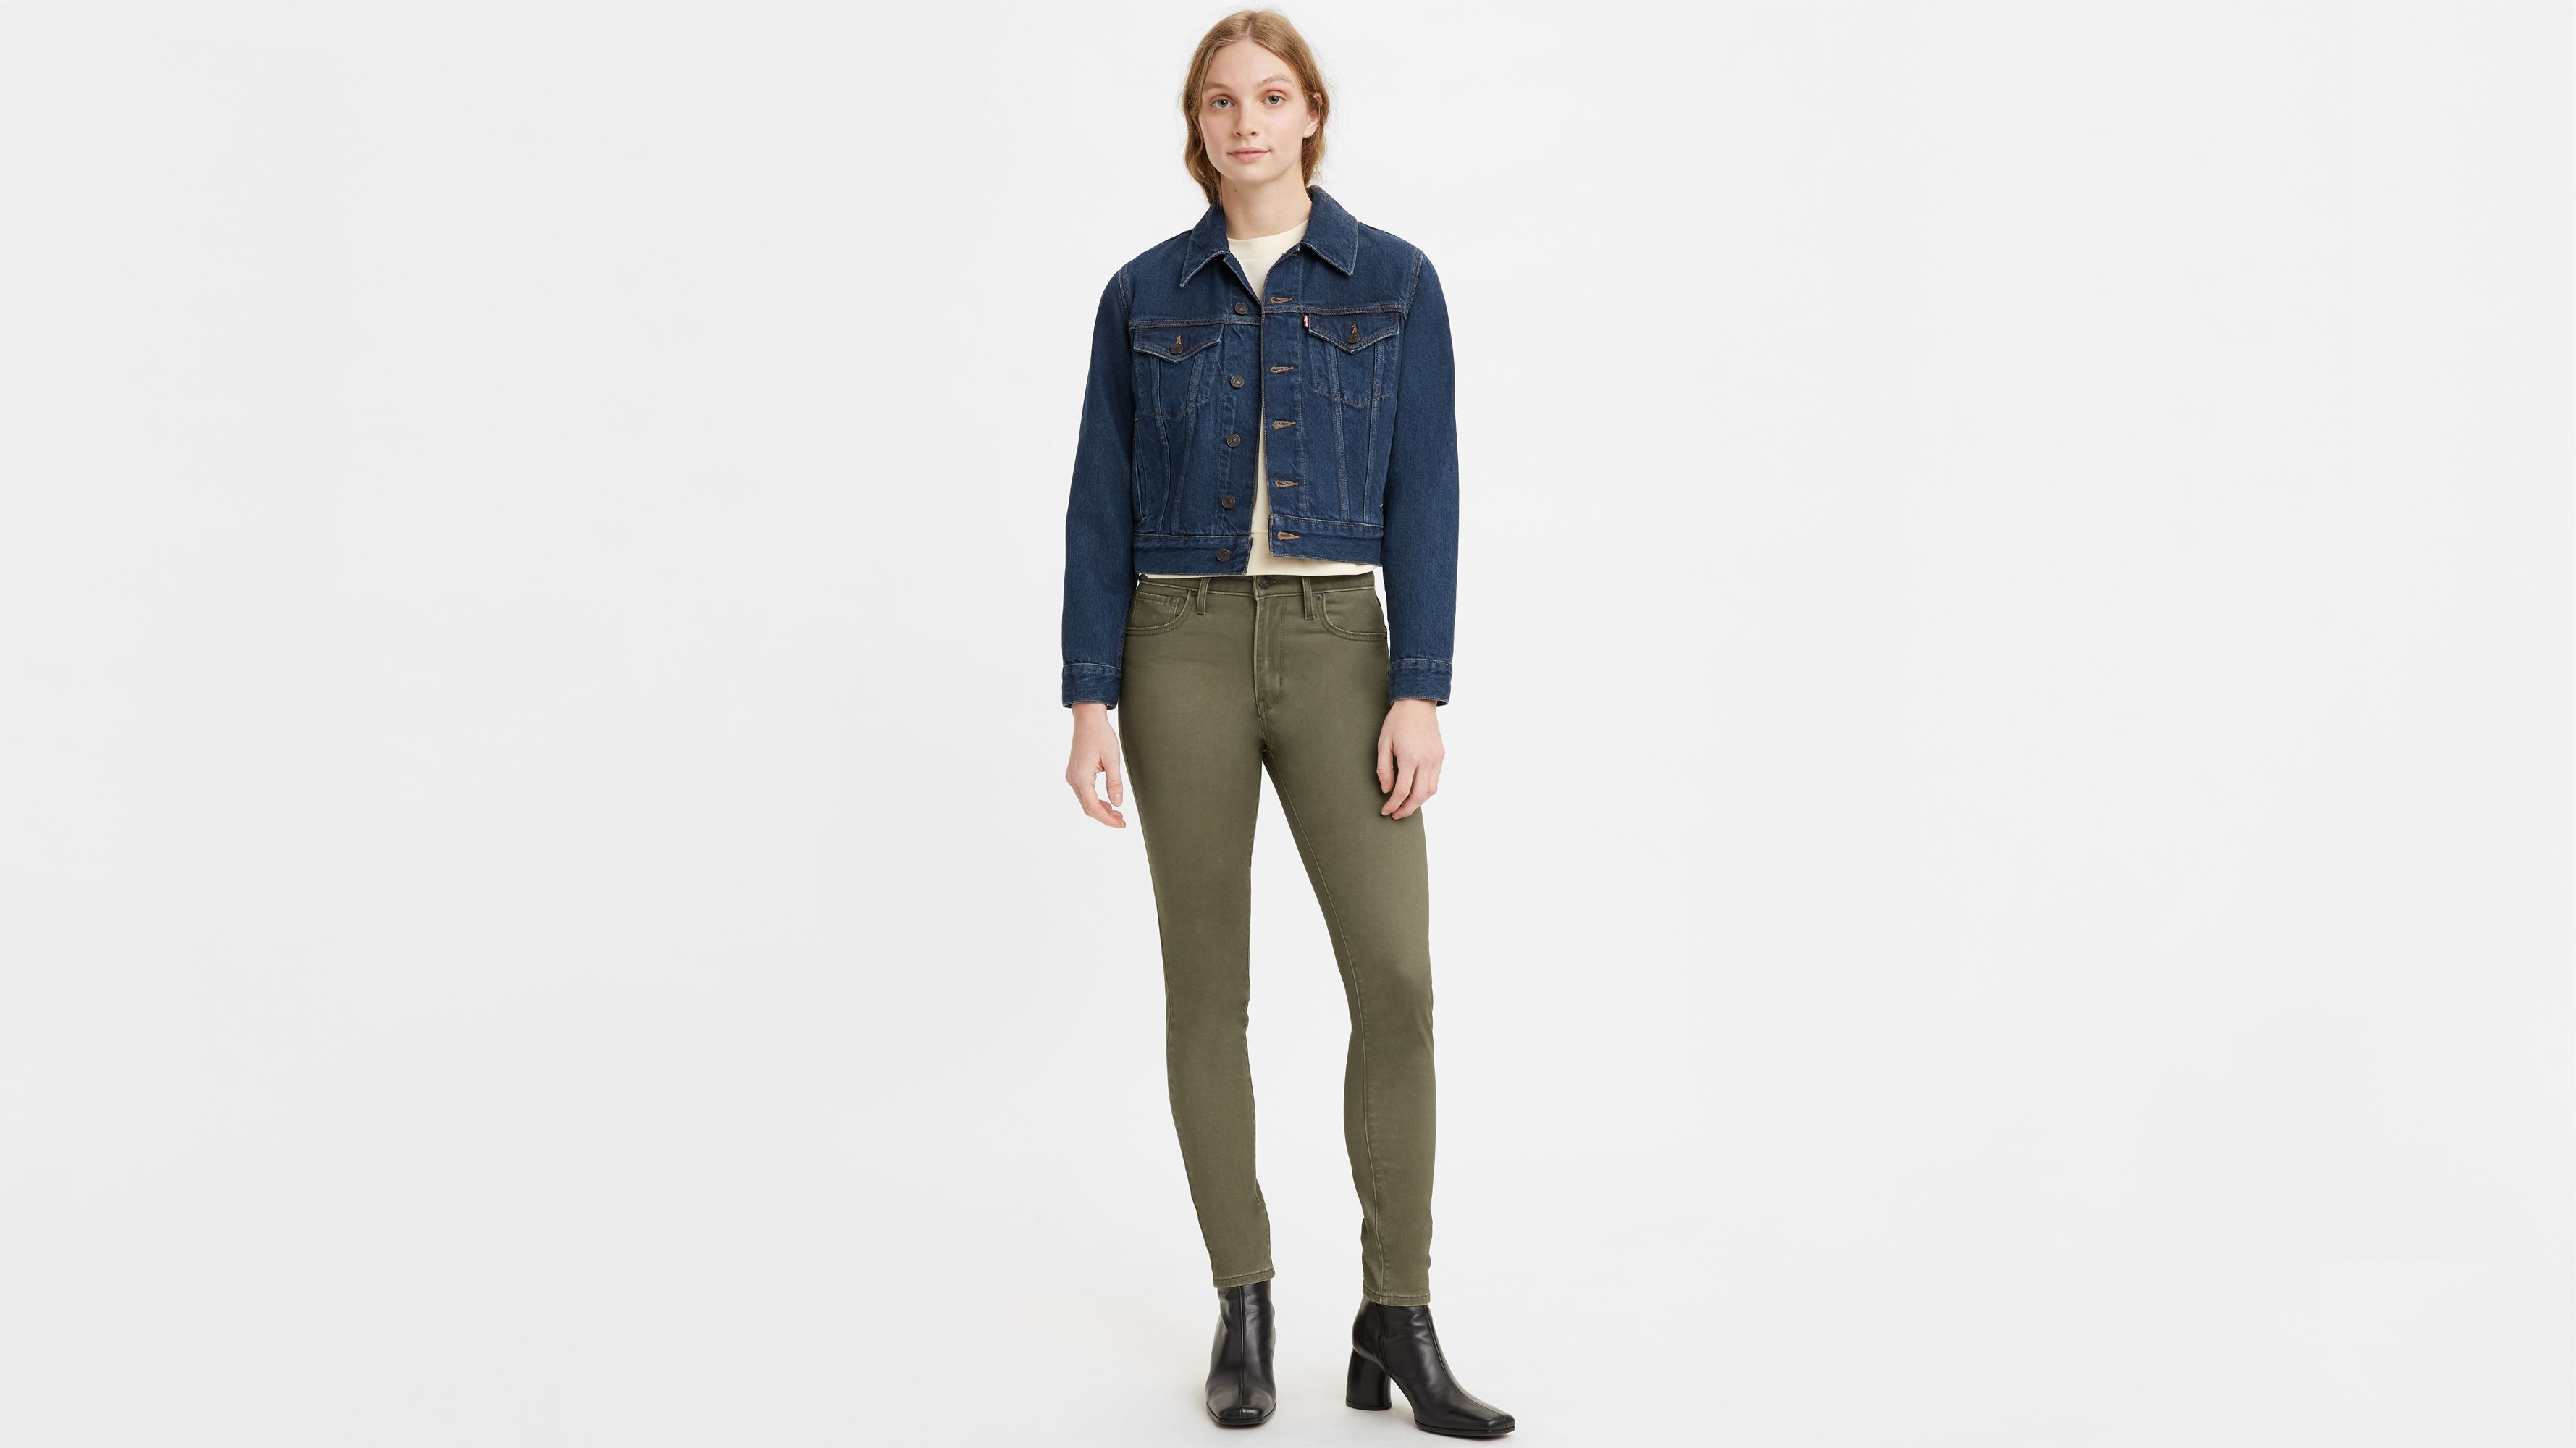 721 High Rise Skinny Utility Women's Jeans - Green